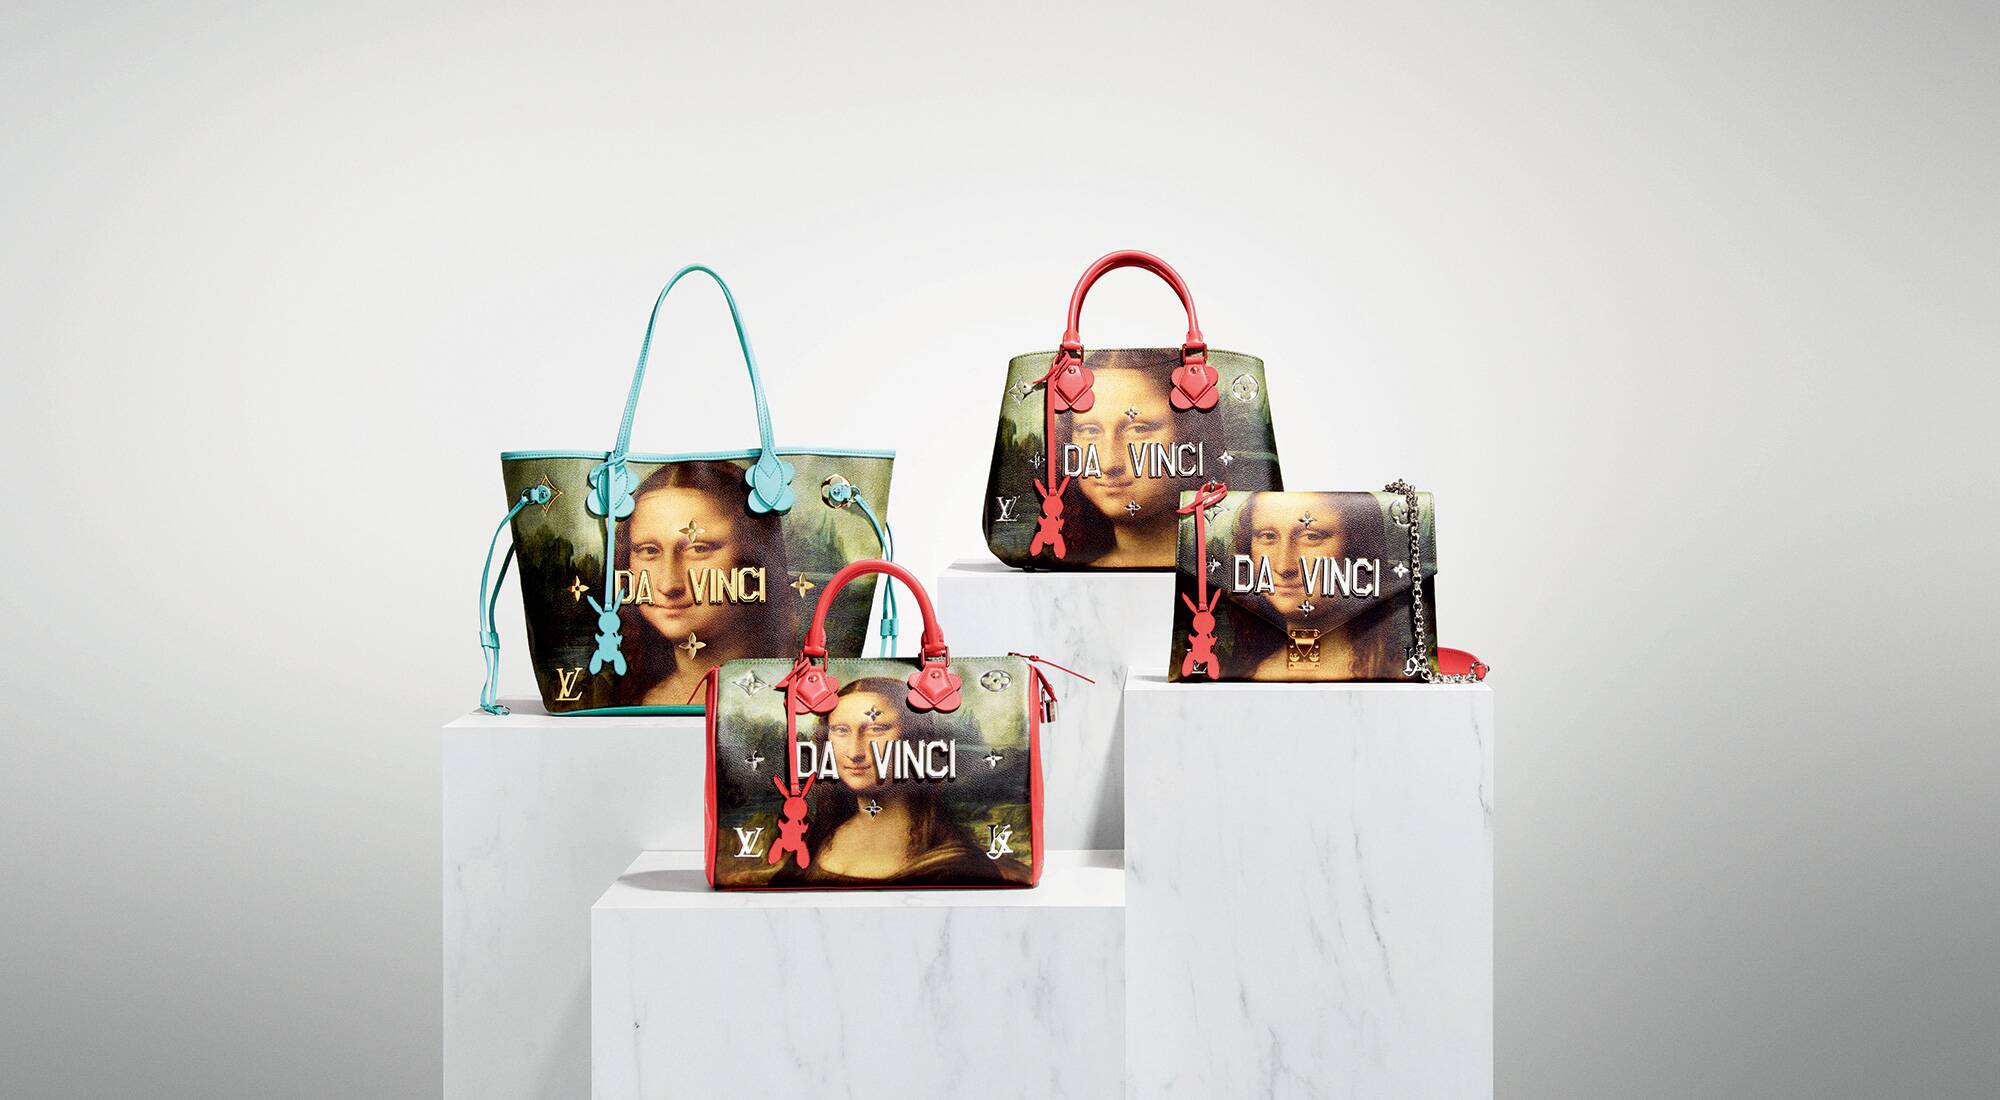 Louis Vuitton x Jeff Koons second collection